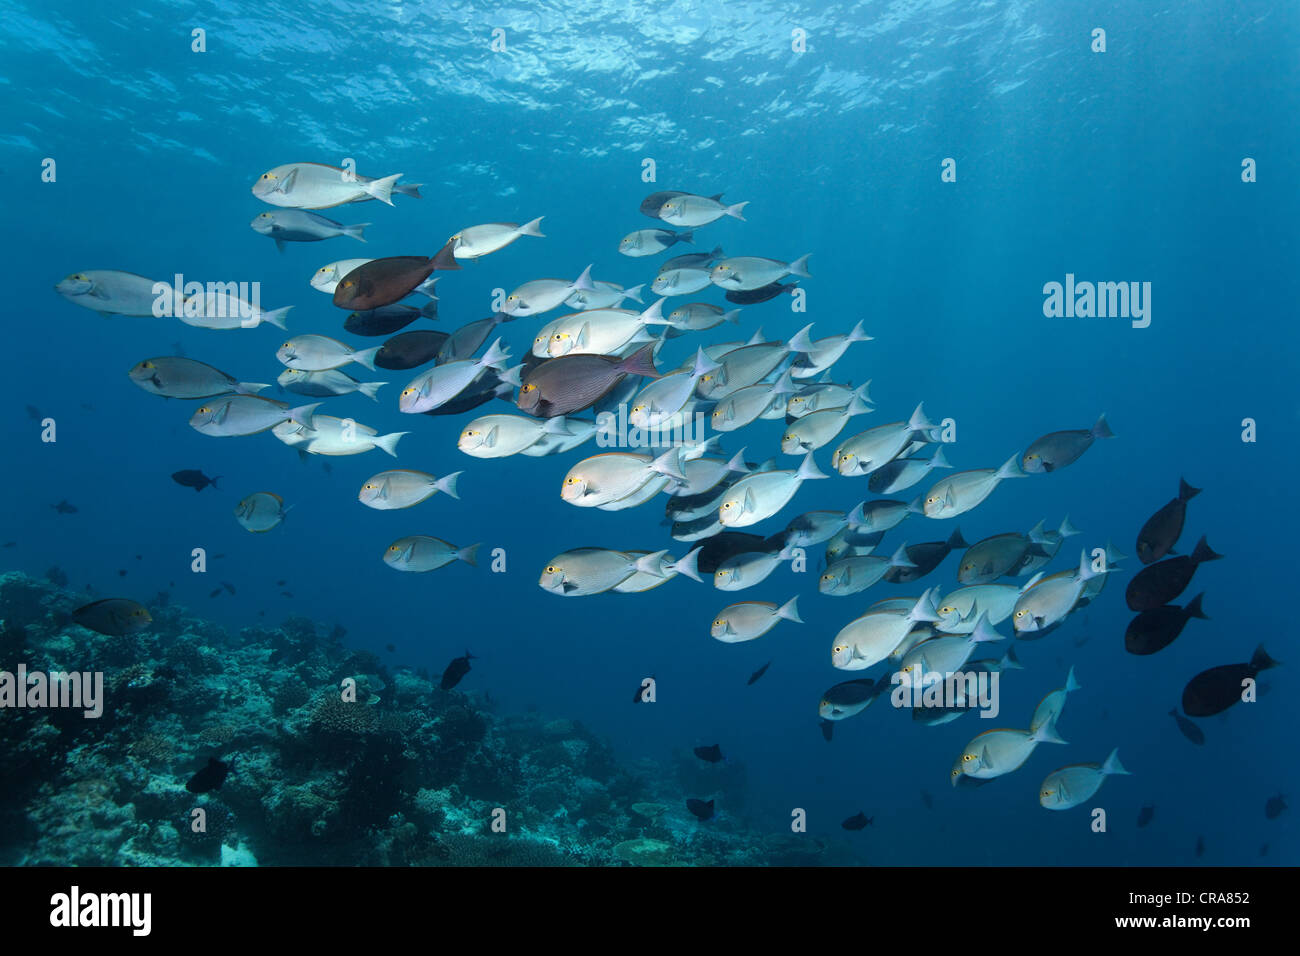 Shoal of Elongate Surgeonfish (Acanthurus mata) swimming above a coral reef in open water, Great Barrier Reef Stock Photo